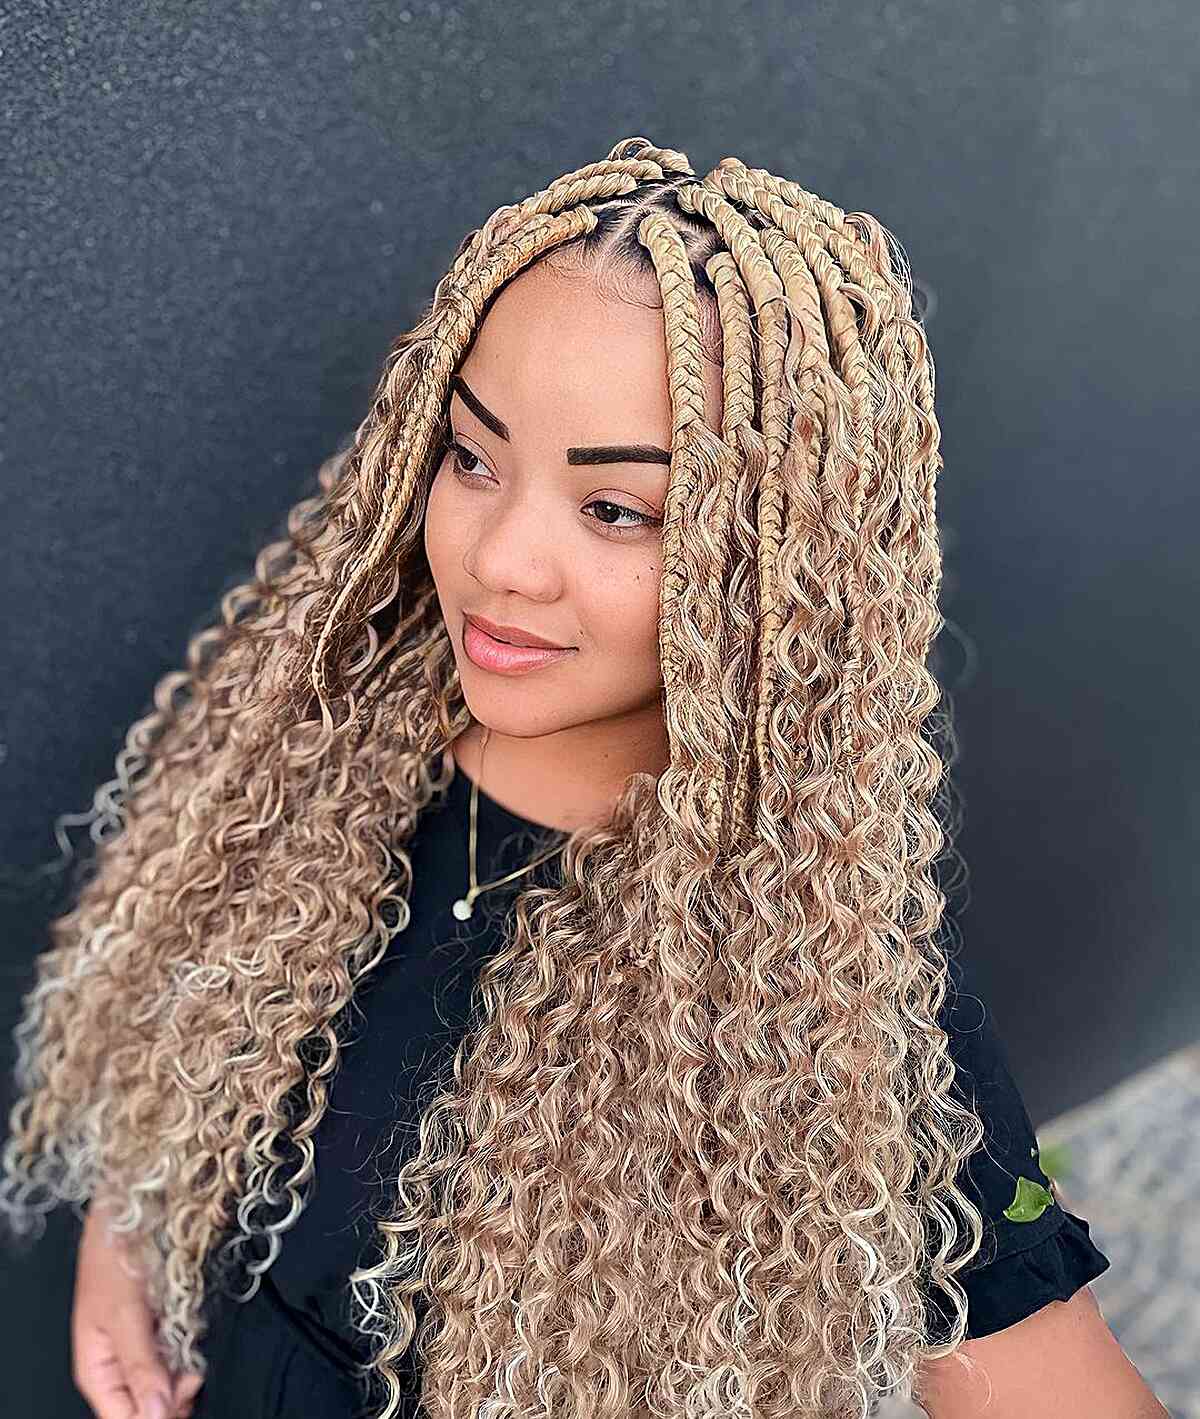 30 Fresh Ideas on Incorporating Peekaboo Braids into Your Next Hairstyle